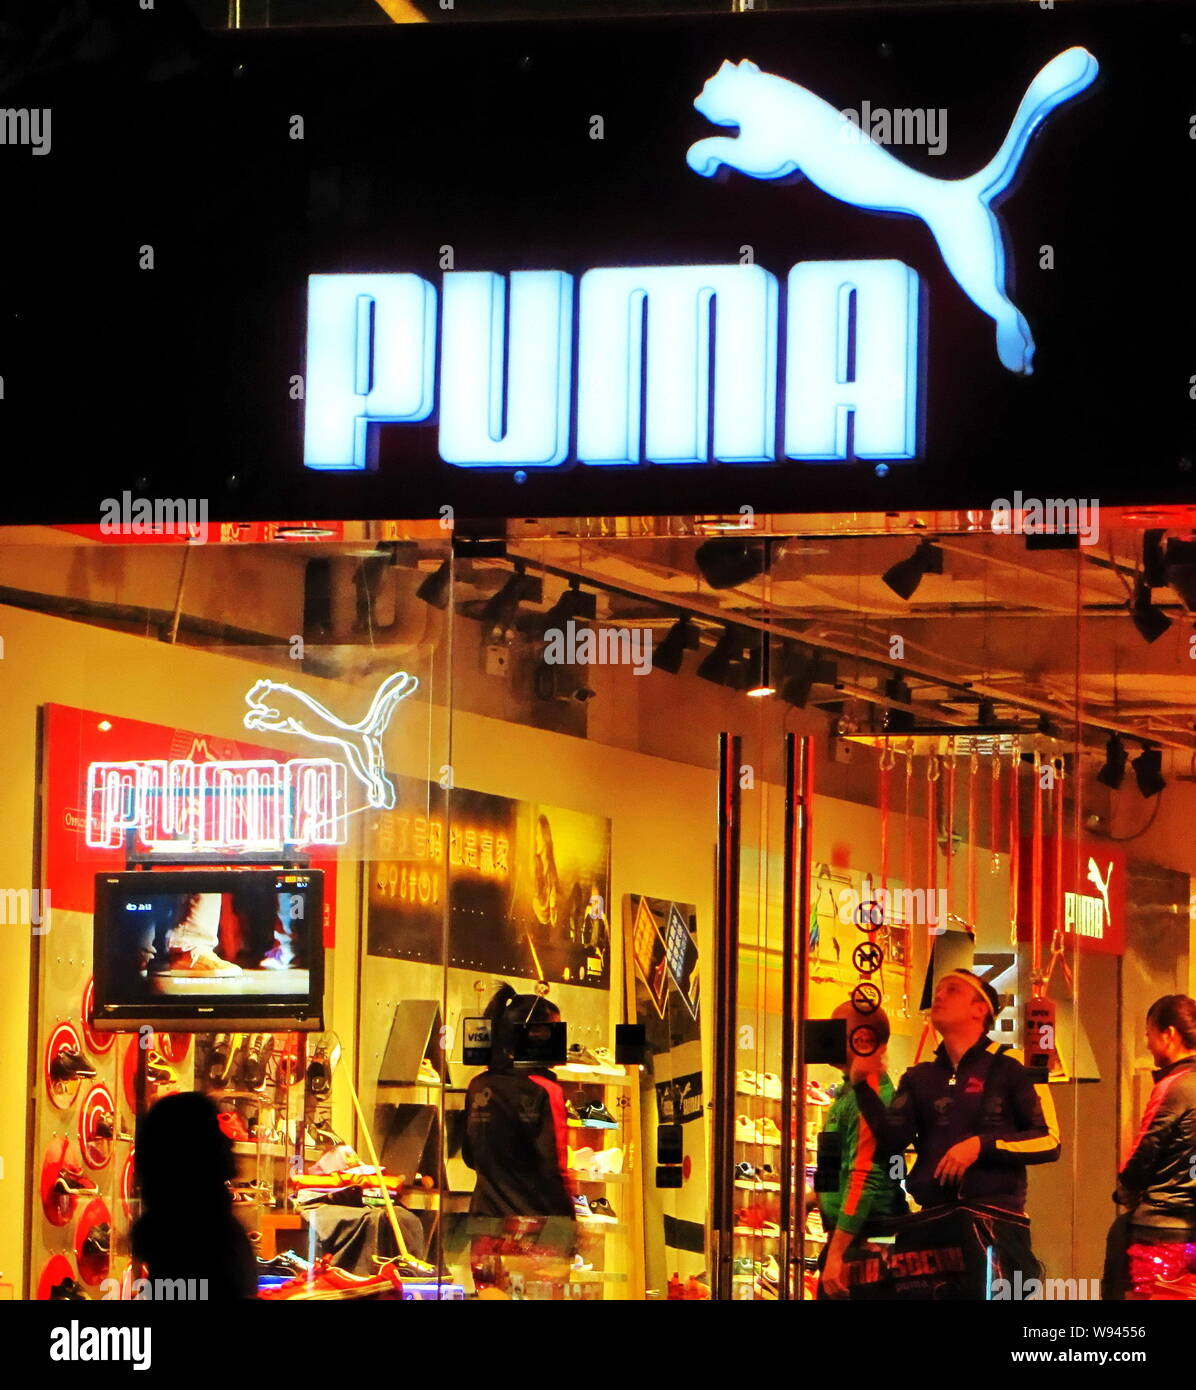 number of puma stores